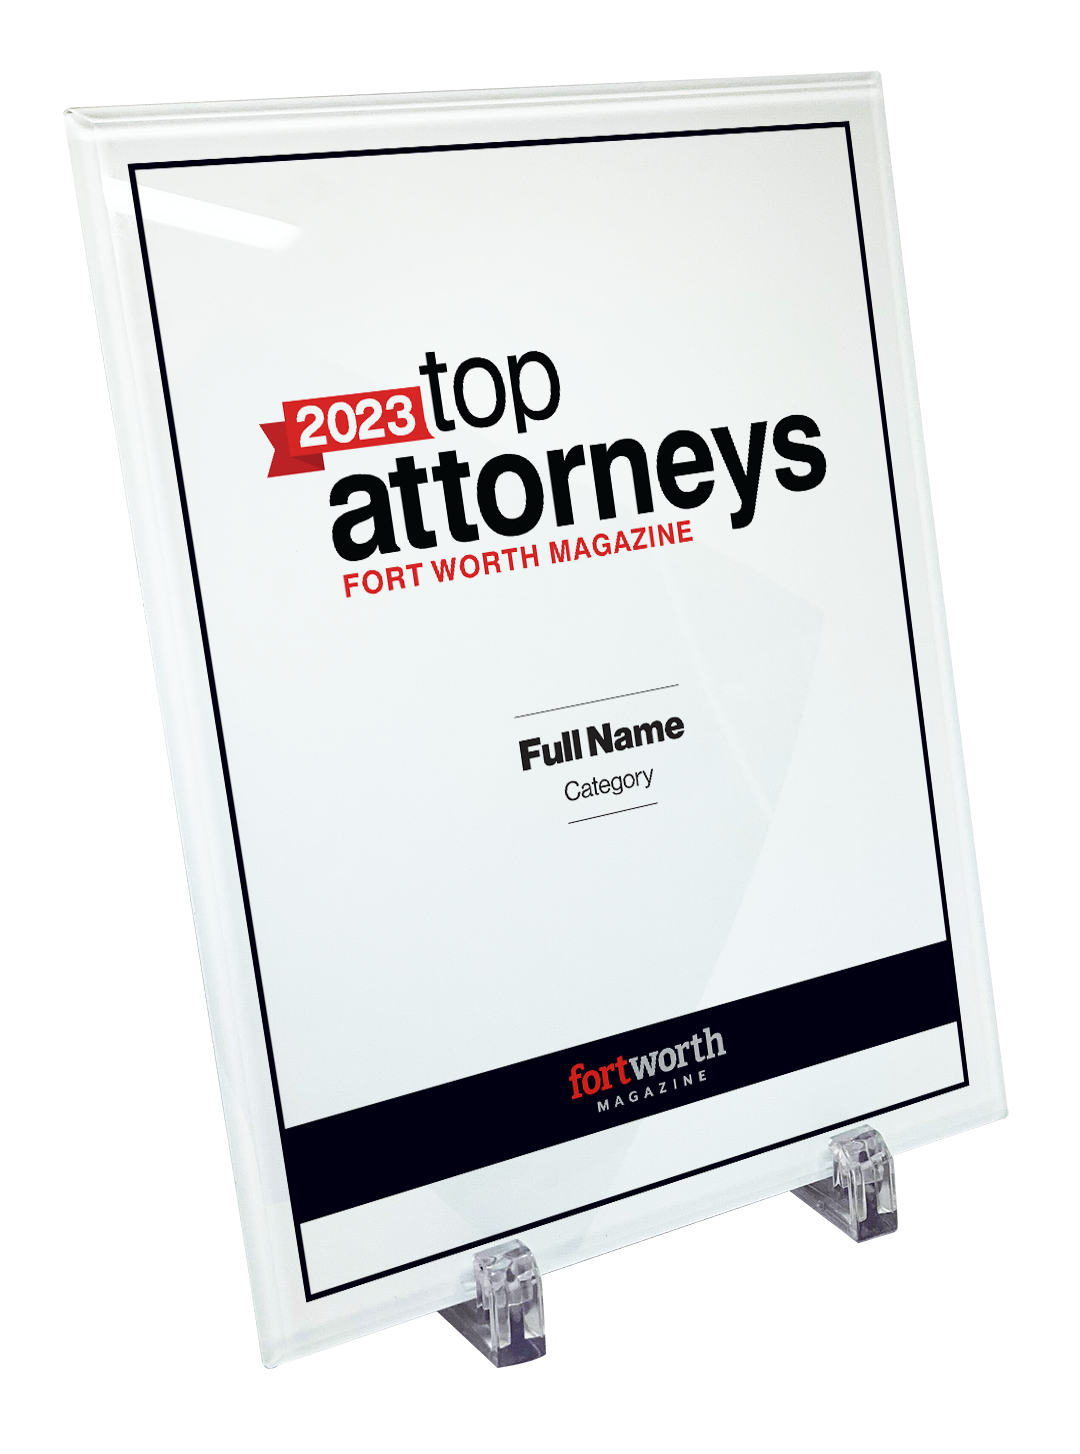 Fort Worth Magazine Top Attorney Crystal Plaque - Award